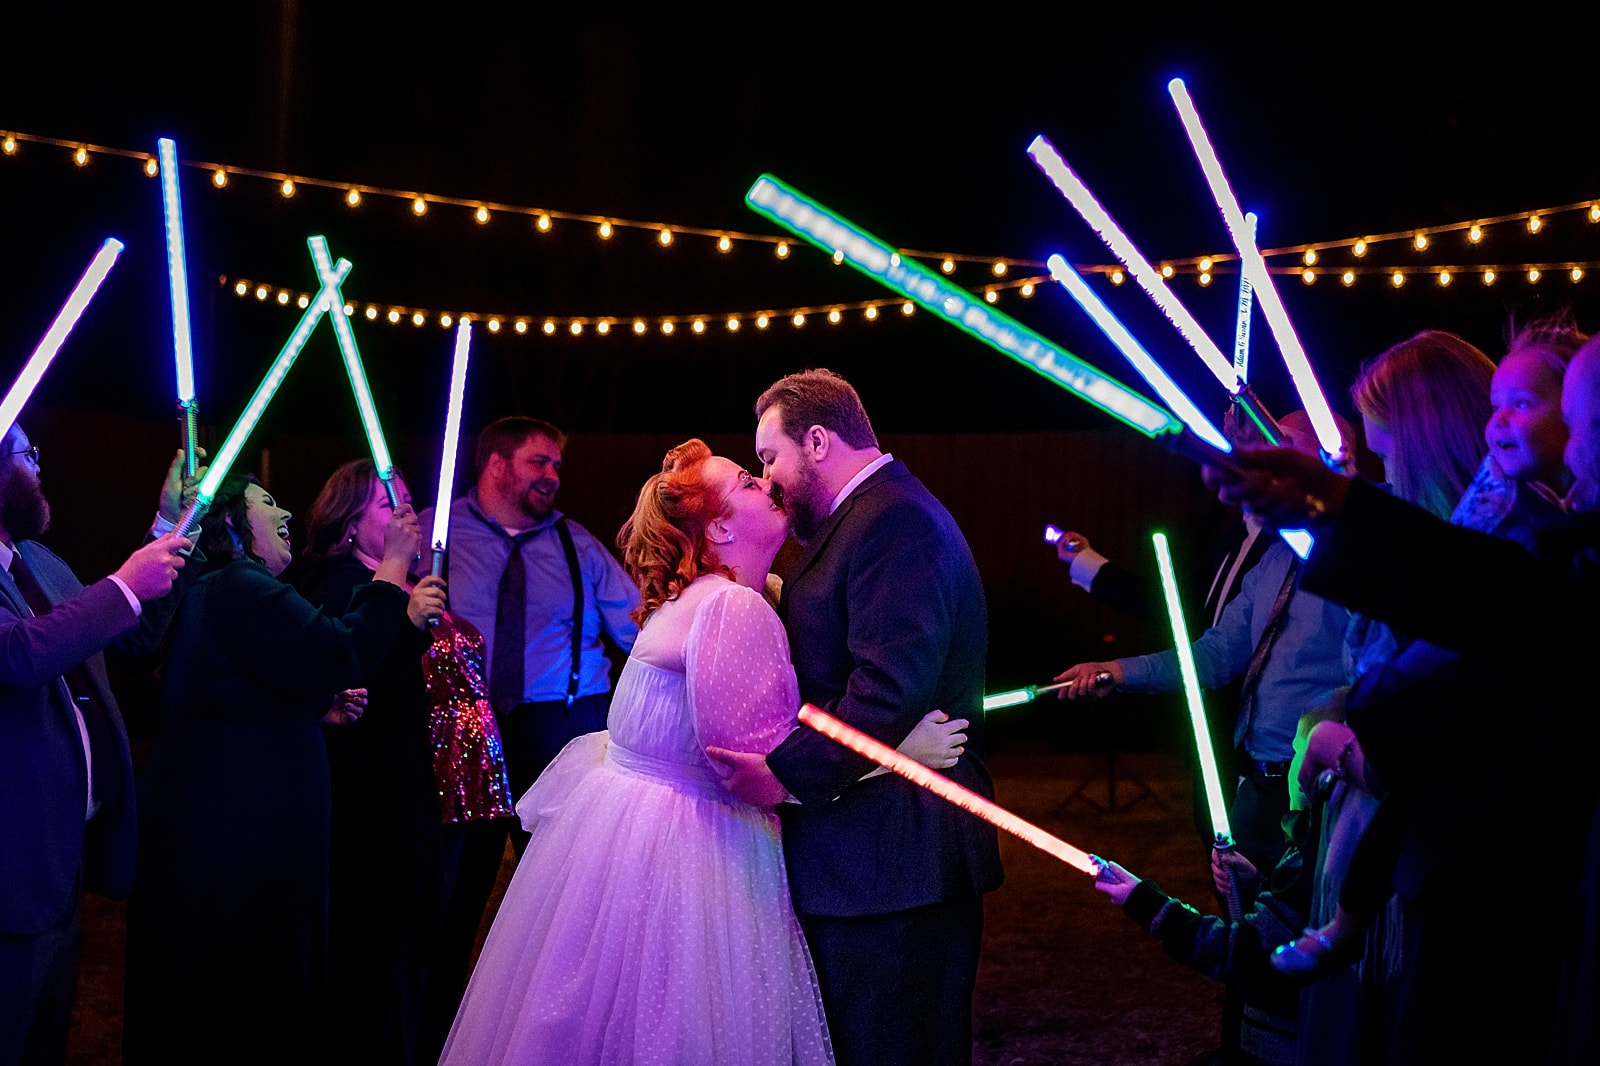 Nerdy wedding with a lightsaber exit